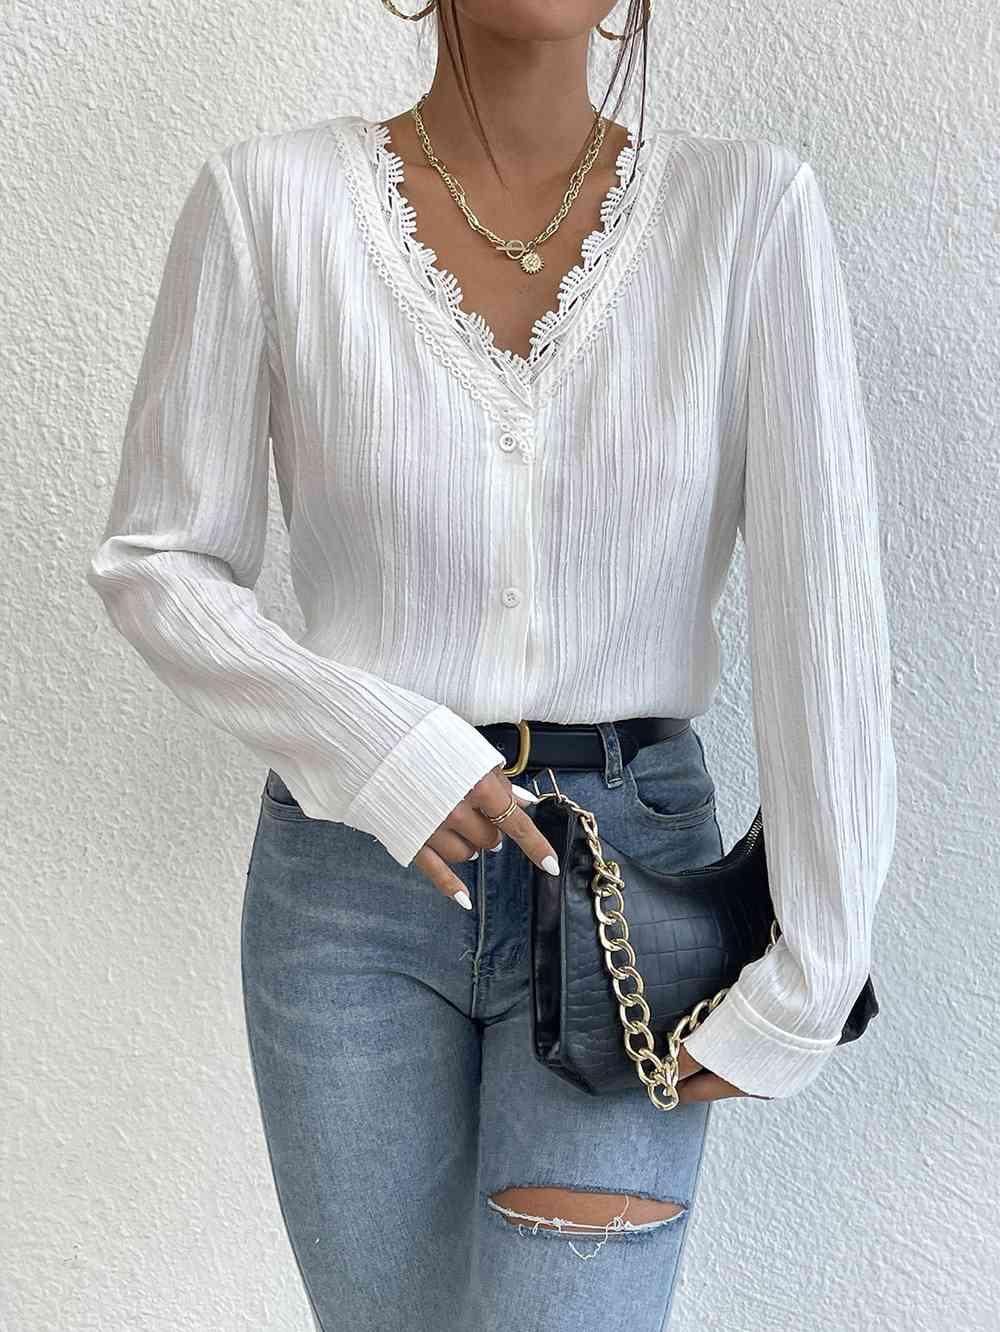 a woman wearing ripped jeans and a white blouse